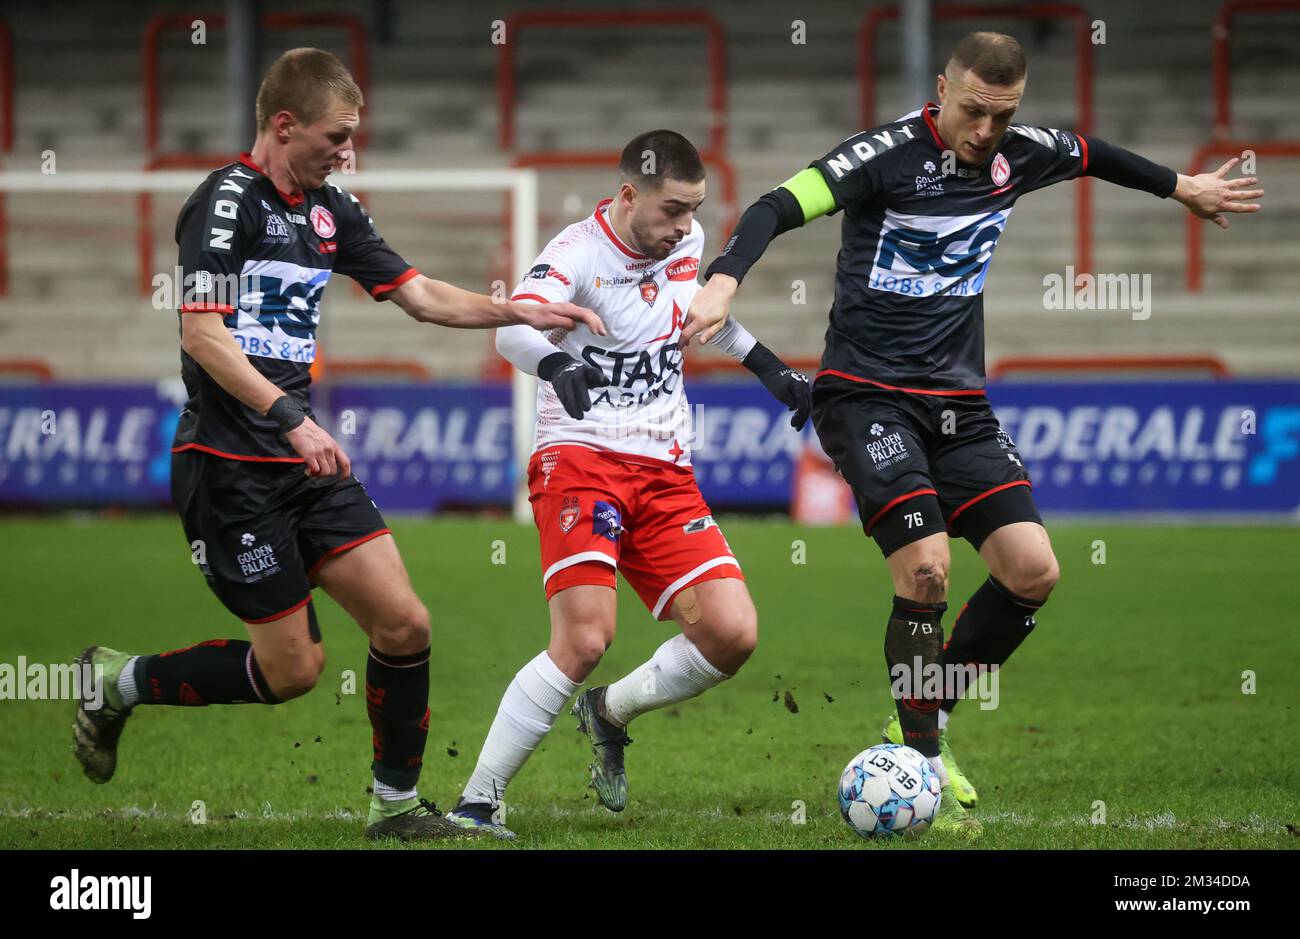 Kortrijk's Abdul Ajagun, Mouscron's Bruno Xadas Alexandre Vieira Almeida and Kortrijk's Timothy Derijck fight for the ball during a soccer match between Royal Excel Mouscron and KV Kortrijk, Friday 05 February 2021 in Mouscron, on day 24 of the 'Jupiler Pro League' first division of the Belgian championship. BELGA PHOTO VIRGINIE LEFOUR Stock Photo